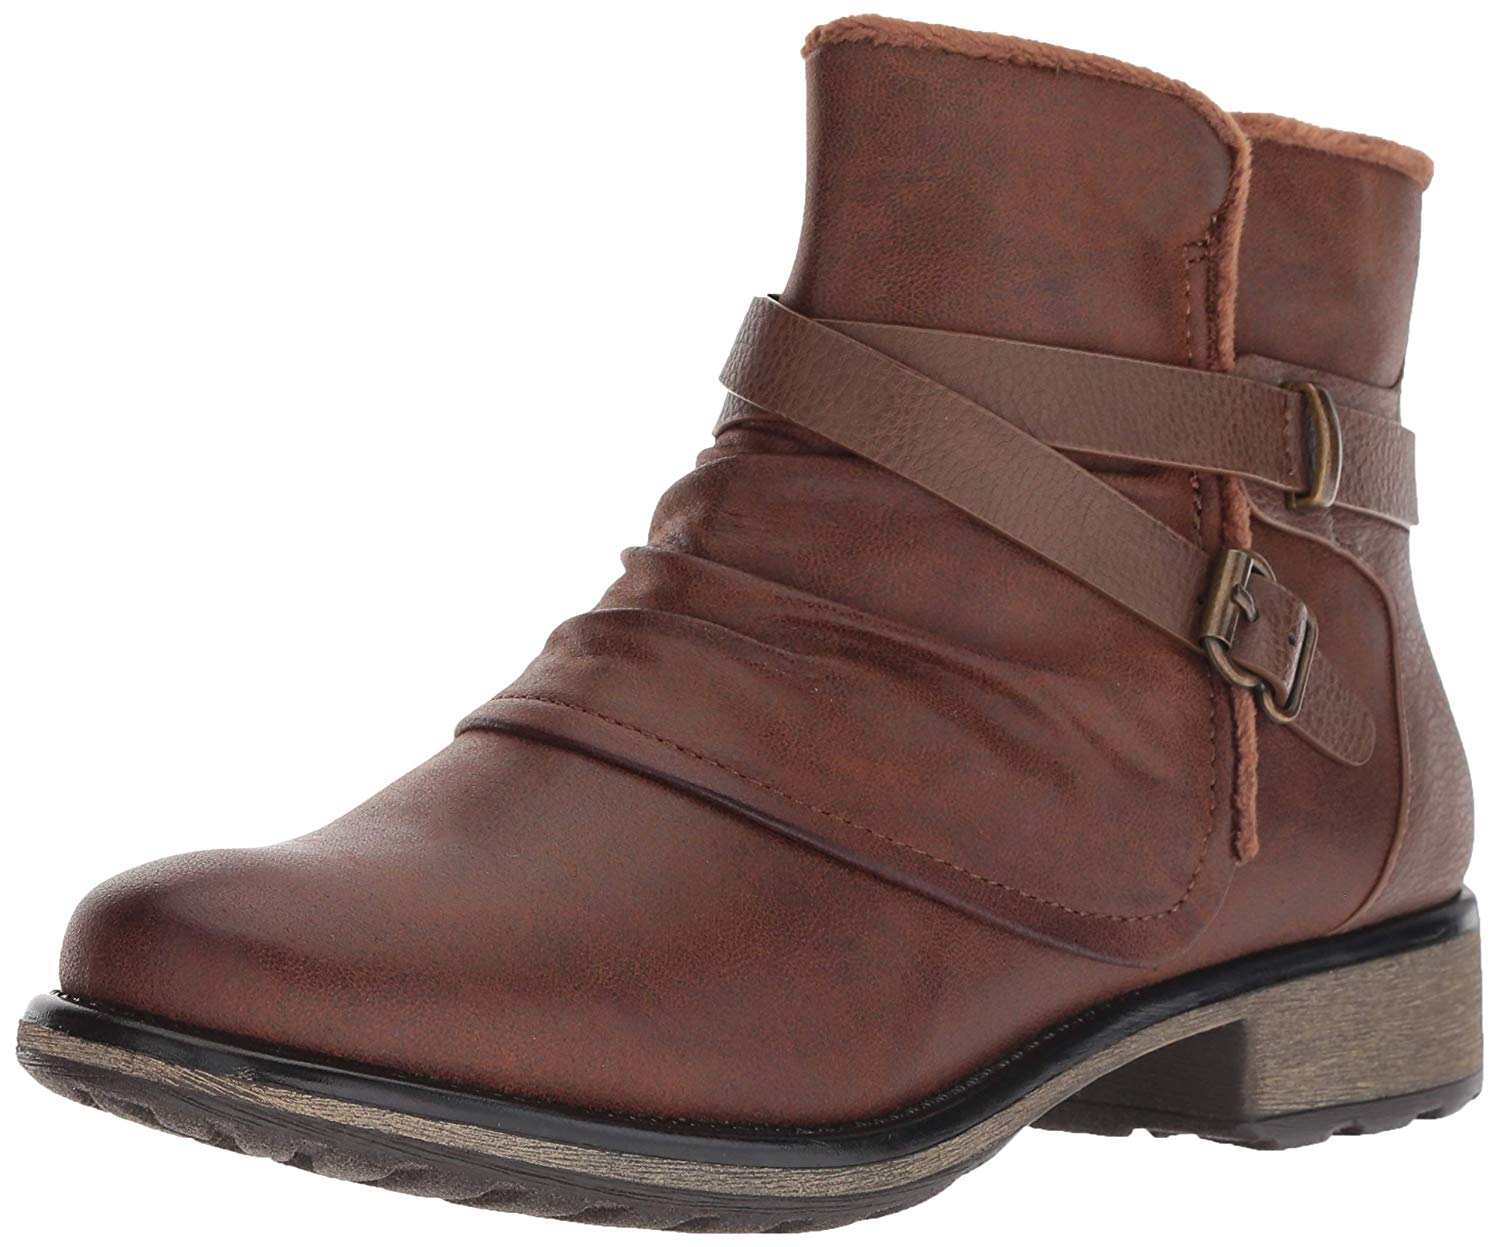 Bare Traps Womens Boots in Brown Color, Size 6 ZUV | eBay